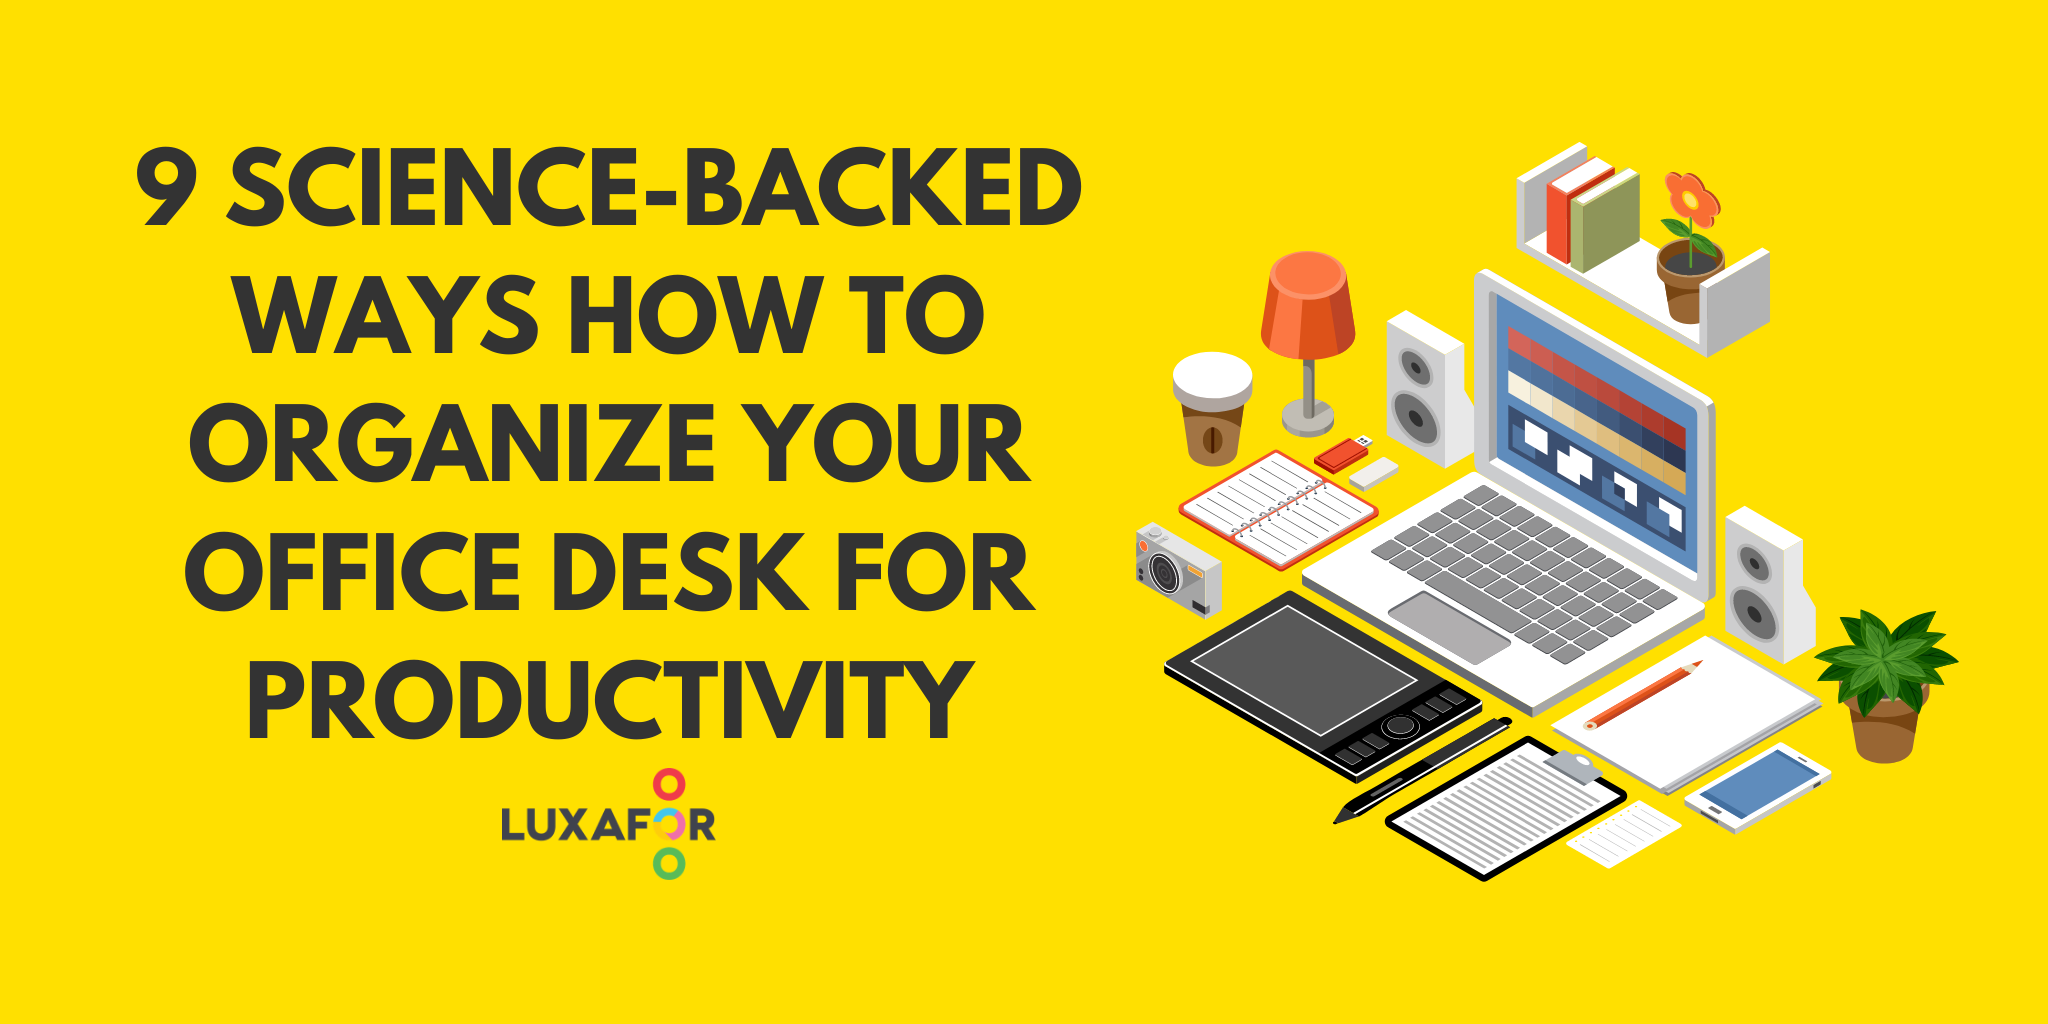 10 Cool Office Gadgets to Increase Your Productivity at Work